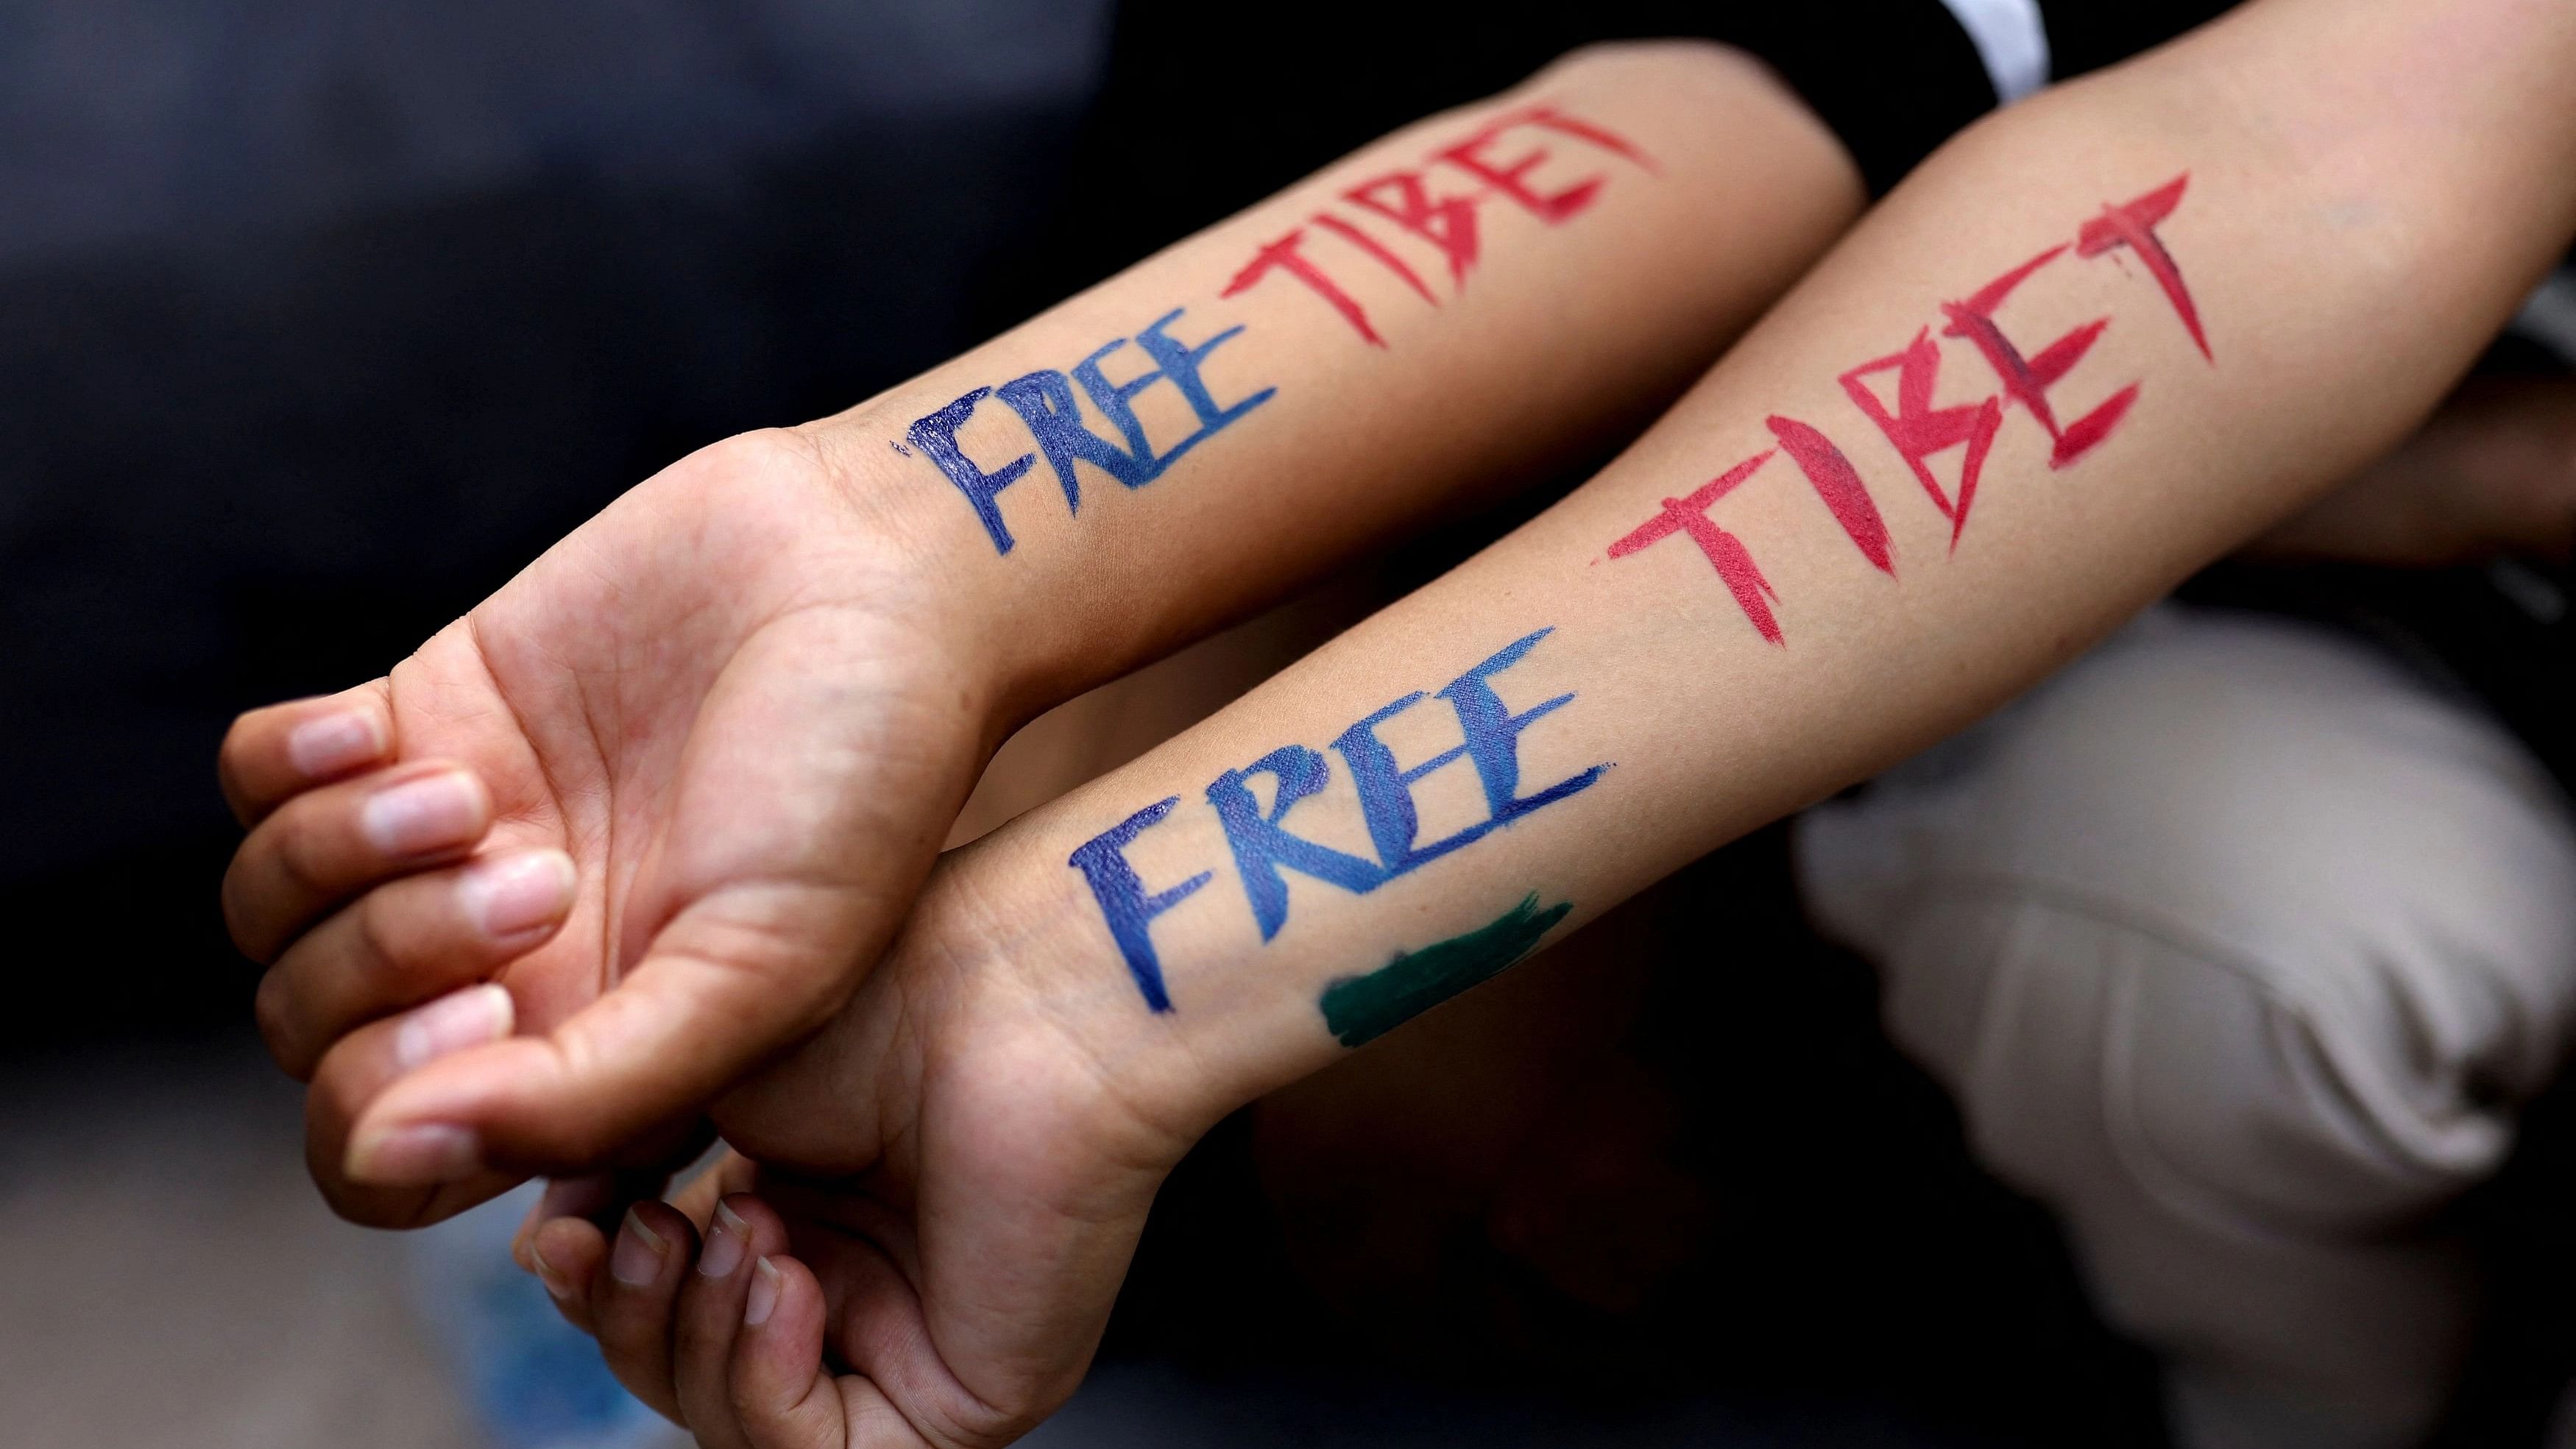 <div class="paragraphs"><p>Members of the Tibetan community show hands painted with the words "Free Tibet" at their refugee colony in Majnu ka Tilla ahead of the G20 summit in New Delhi.</p></div>